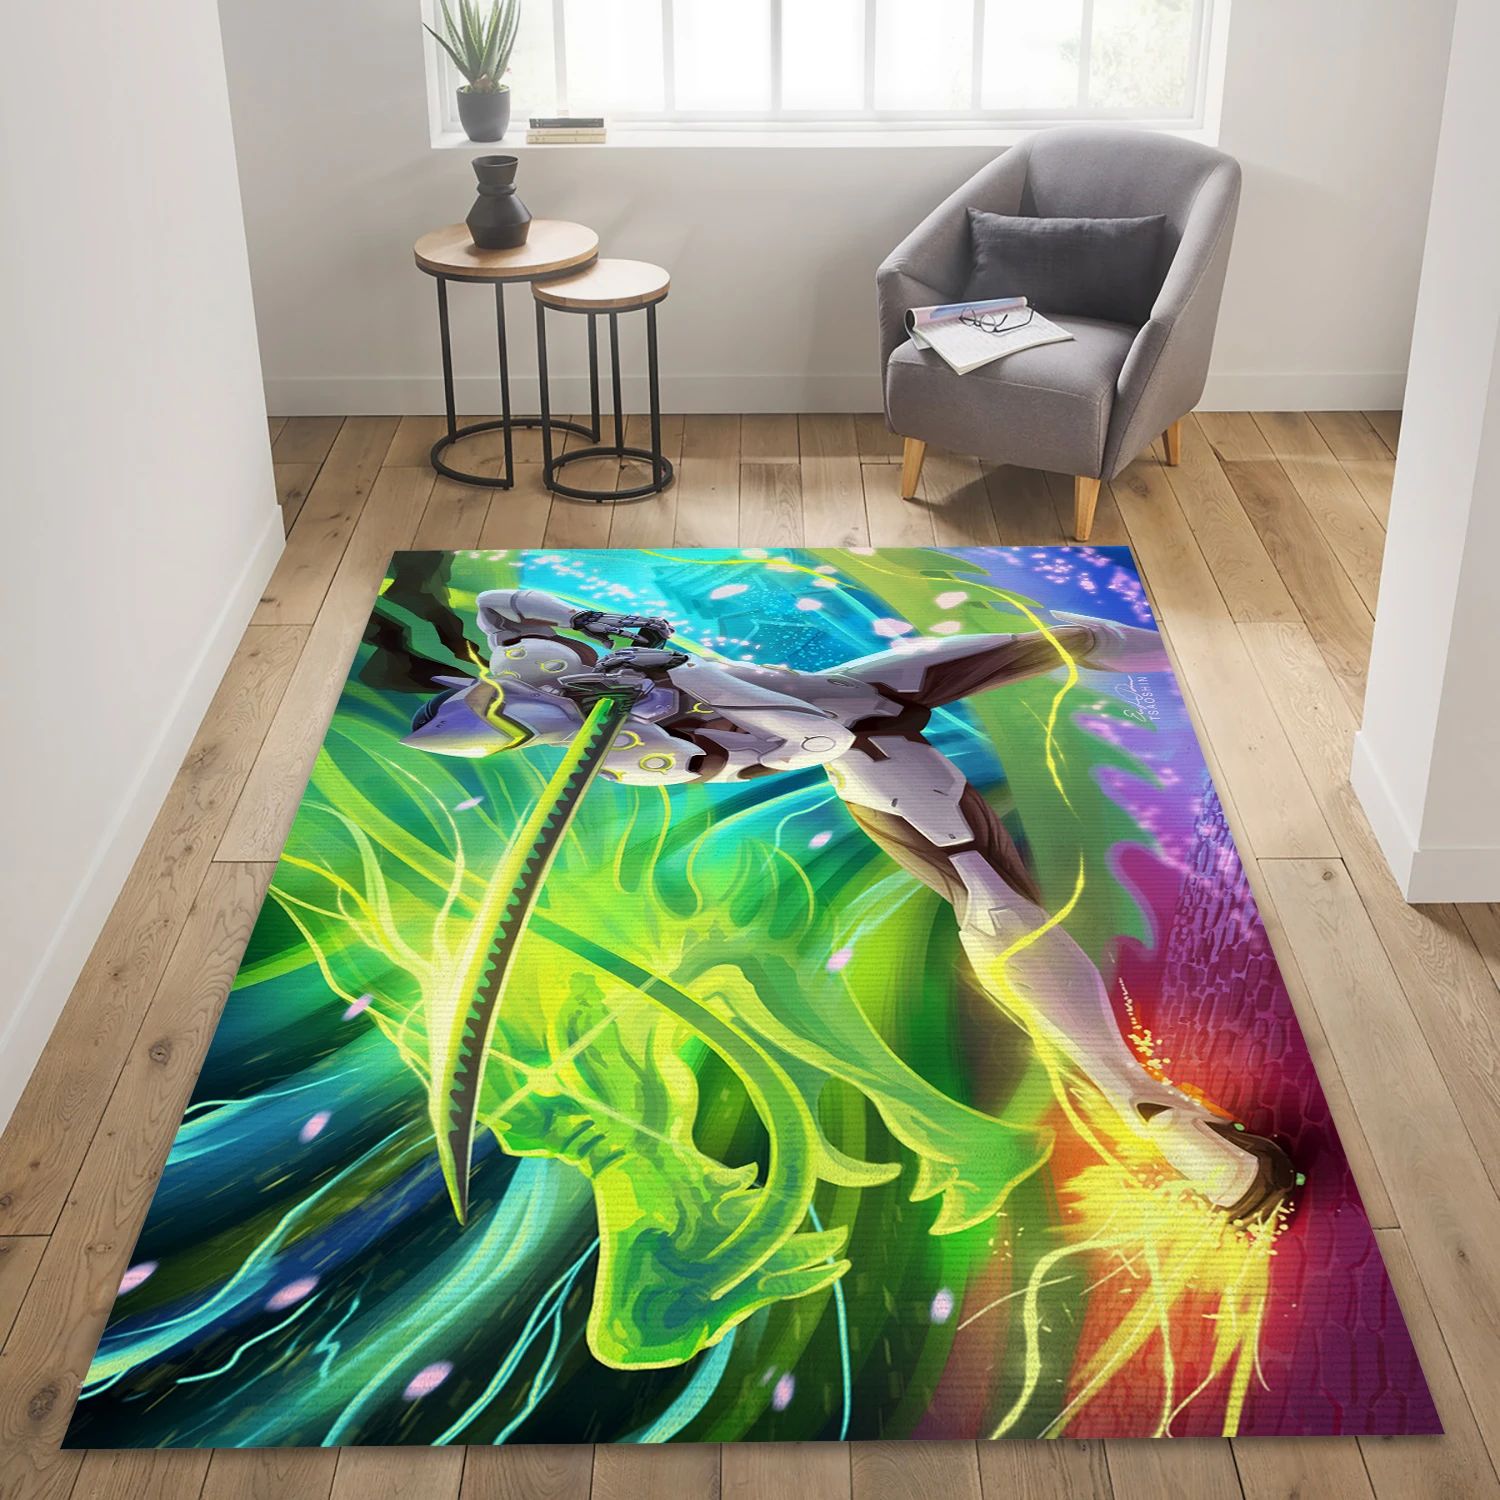 Dragon Blade Genji Video Game Area Rug For Christmas, Living Room Rug - Home Decor Floor Decor - Indoor Outdoor Rugs